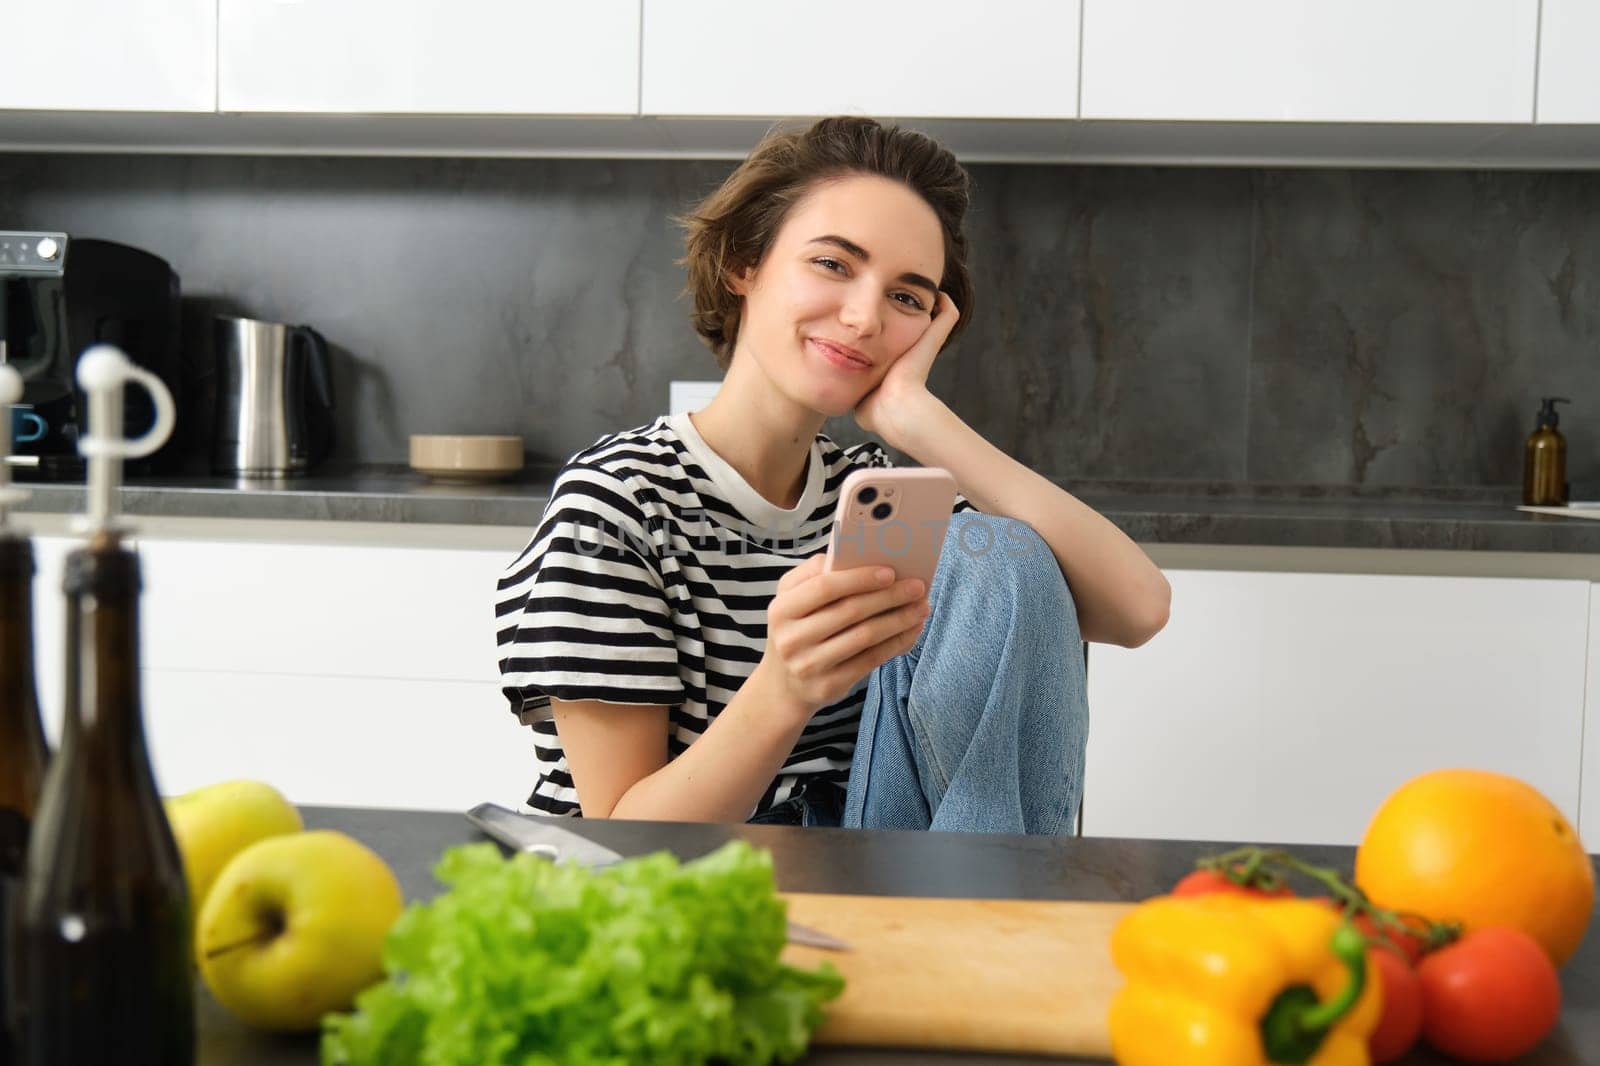 Portrait of young woman searching for cooking recipes online using smartphone, sitting near vegetables, salad ingredients and chopping board, smiling at camera.